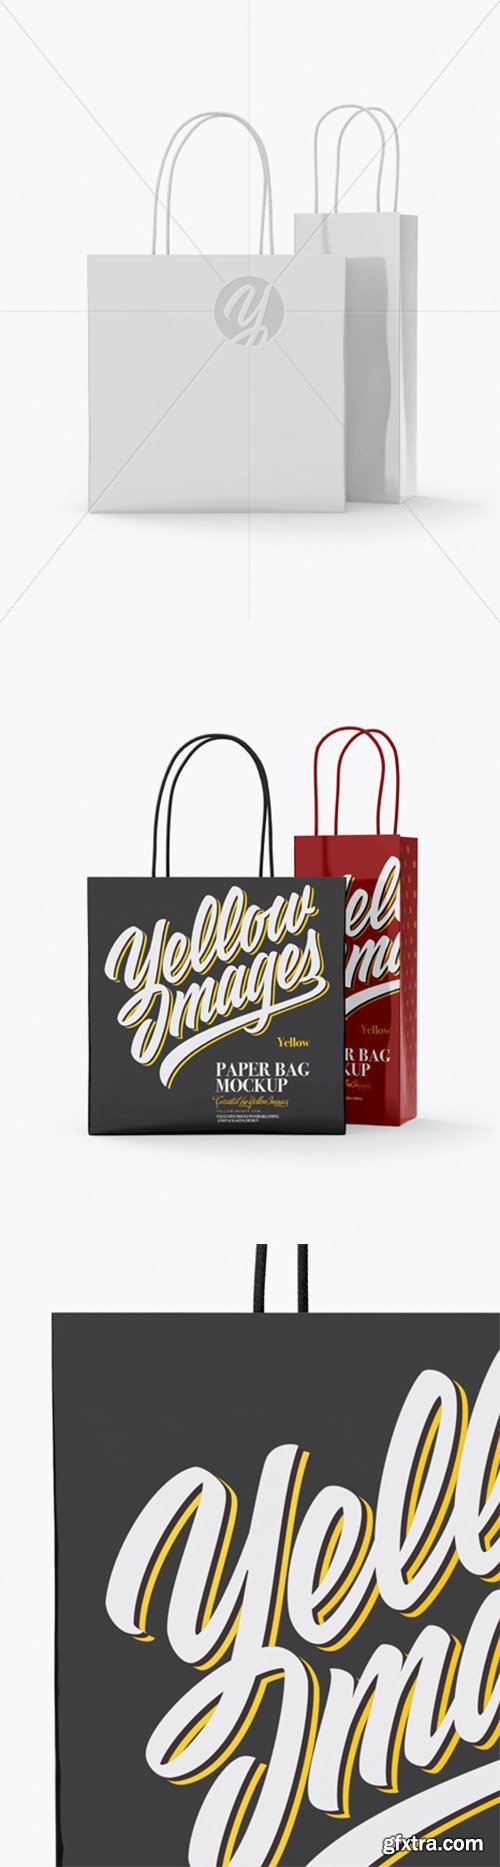 Two Glossy Paper Bags Mockup - Half Side View 27793